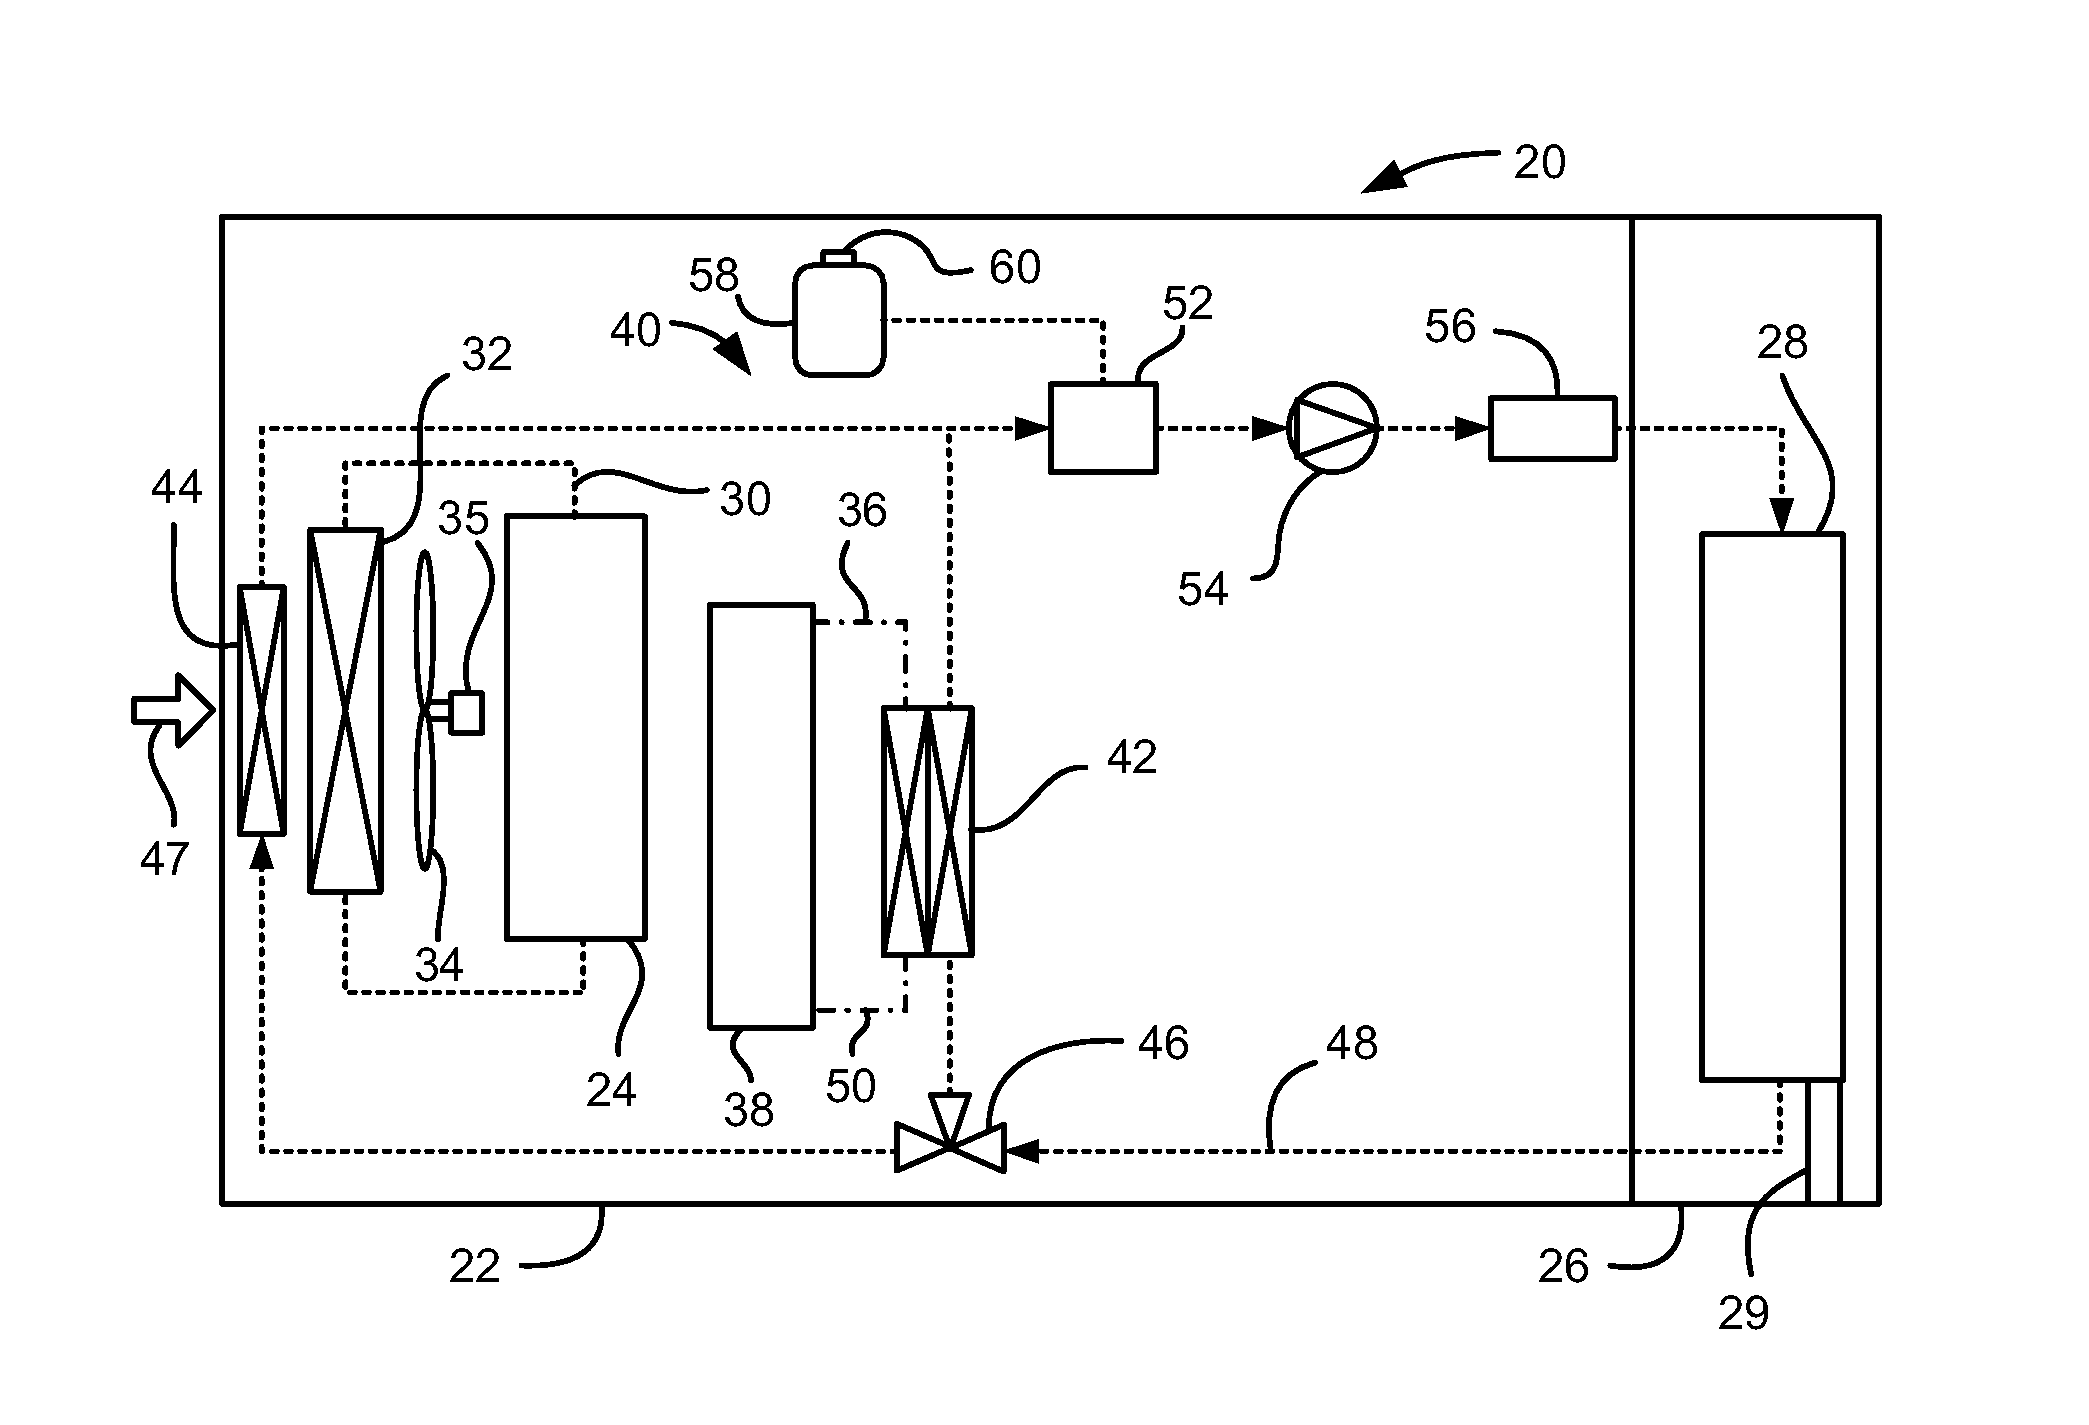 Battery Thermal System for Vehicle